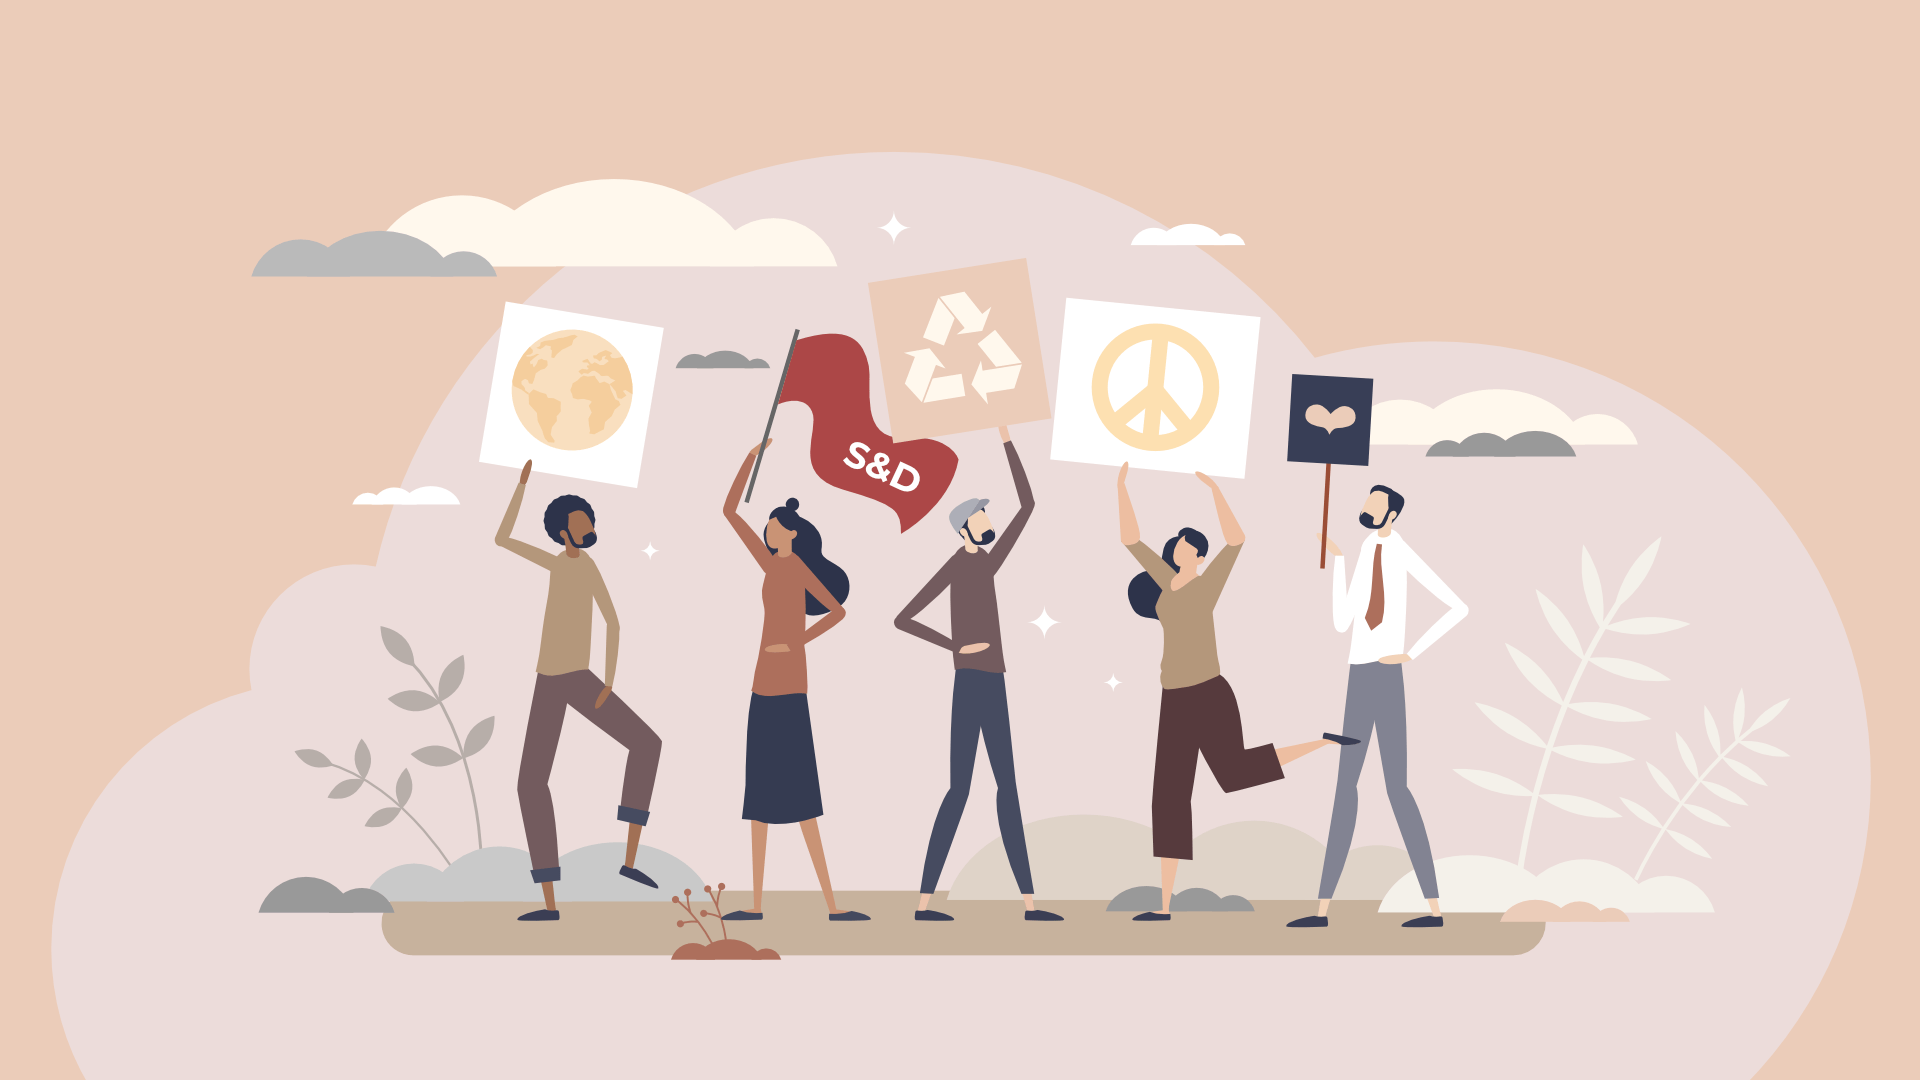 Illustration of activists demanding for good things